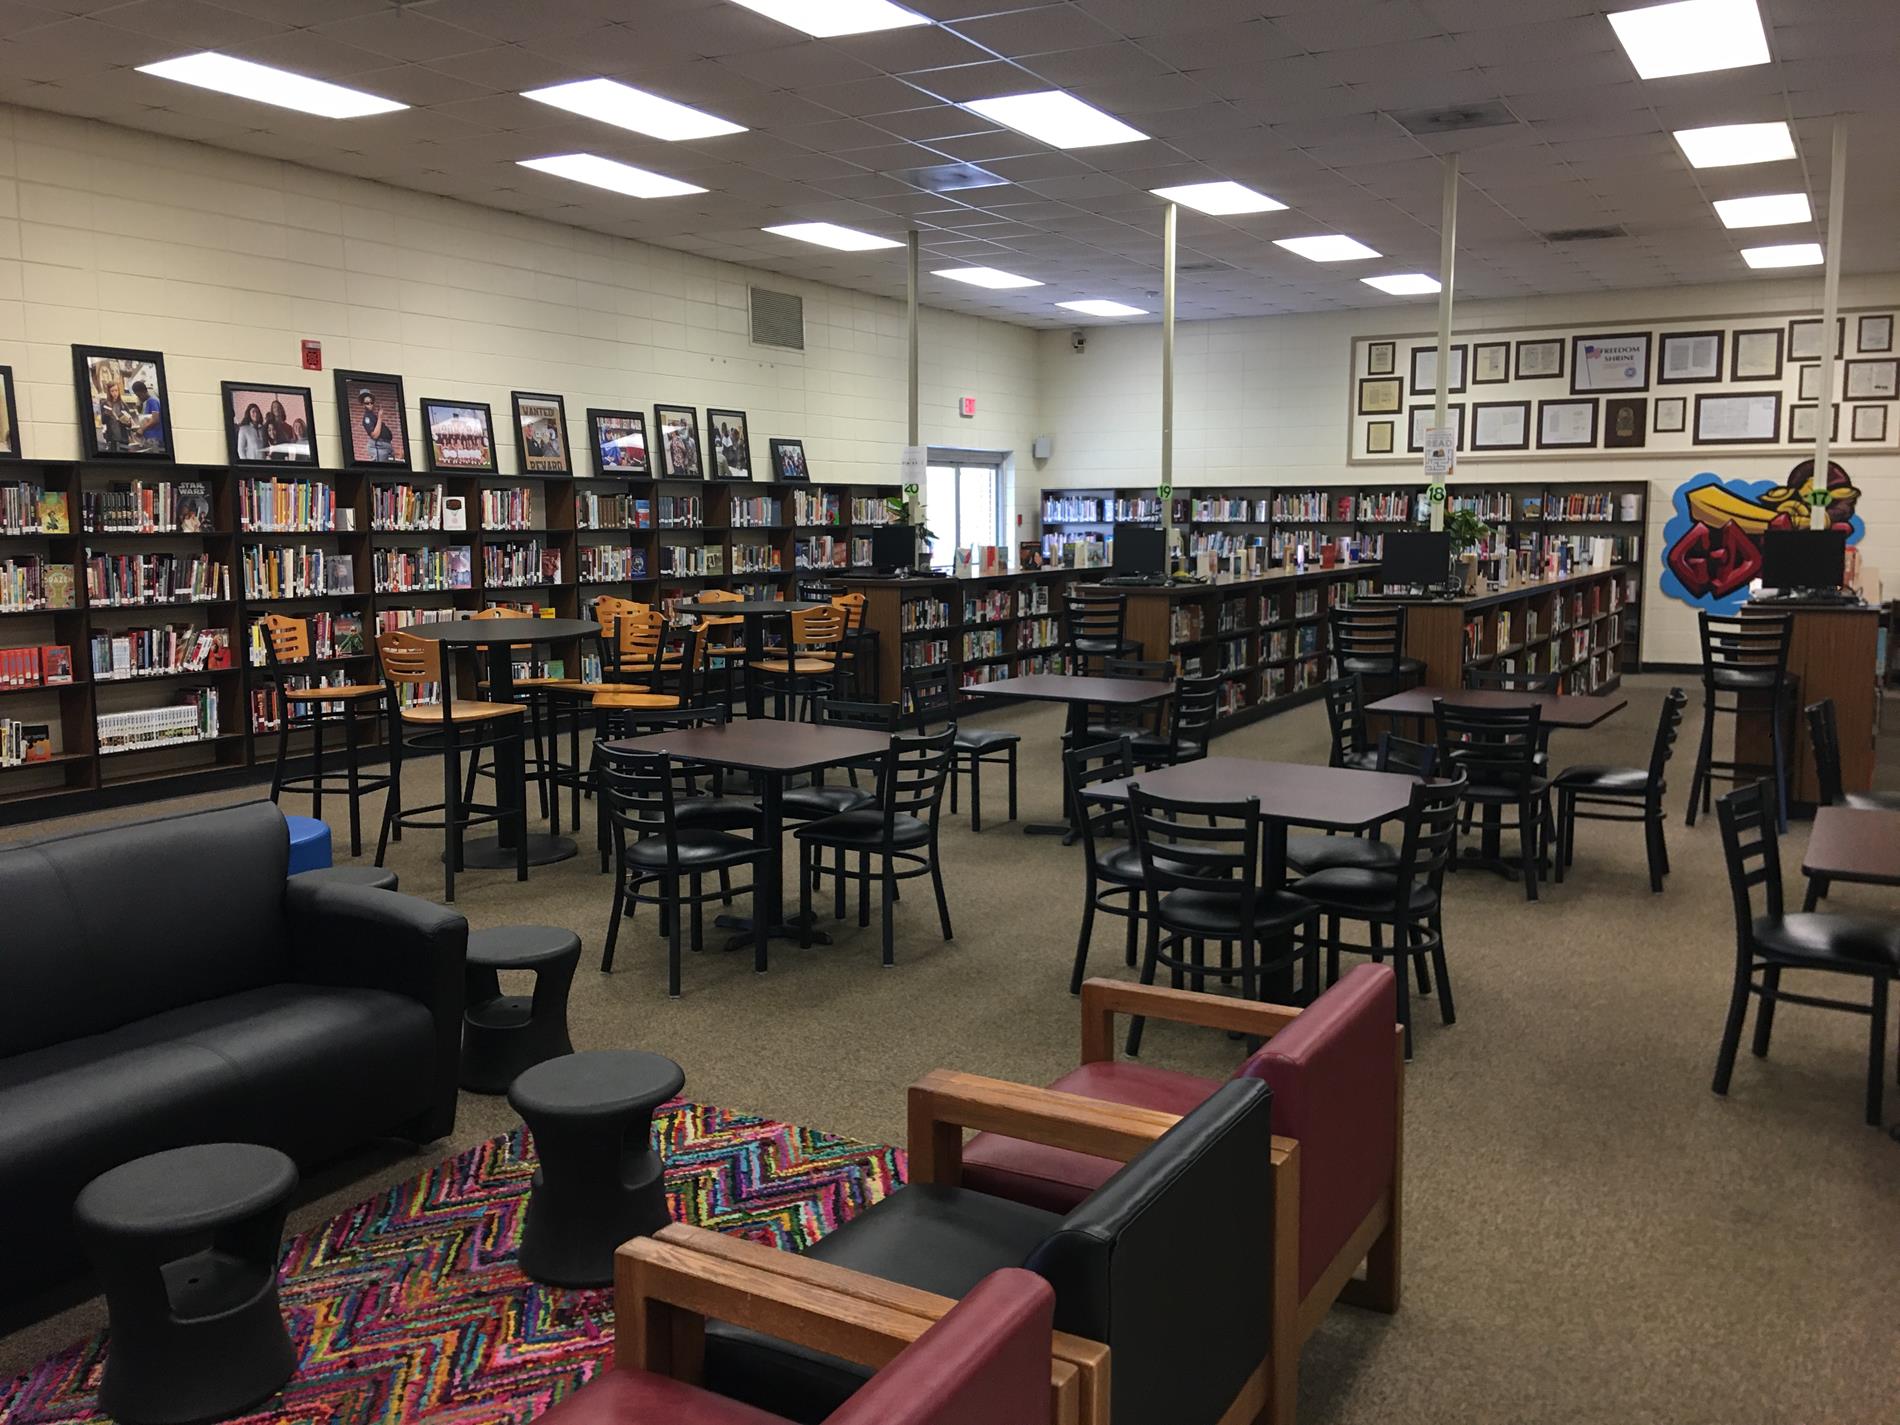 Photo of tables, chairs, and book shelves in the GWCFC media center